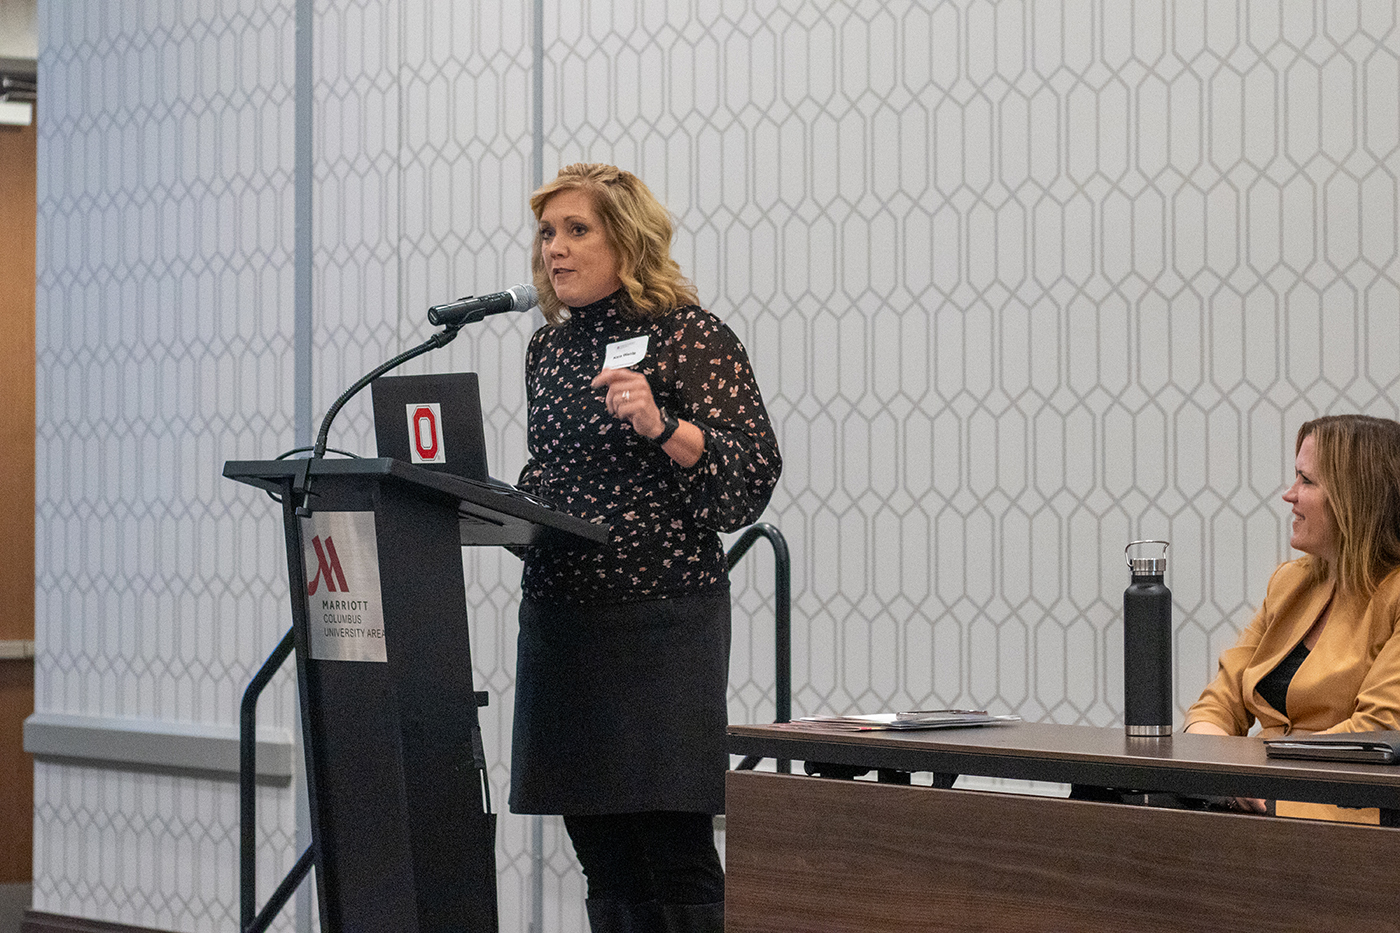 Kara Wente, director of the Ohio Department of Children and Youth, stands behind a podium and speaks into a microphone attached to the podium during the 2023 Crane Symposium on Children. To the right, Dr. Laura Justice, Crane Center executive director, sits behind a table and listens.